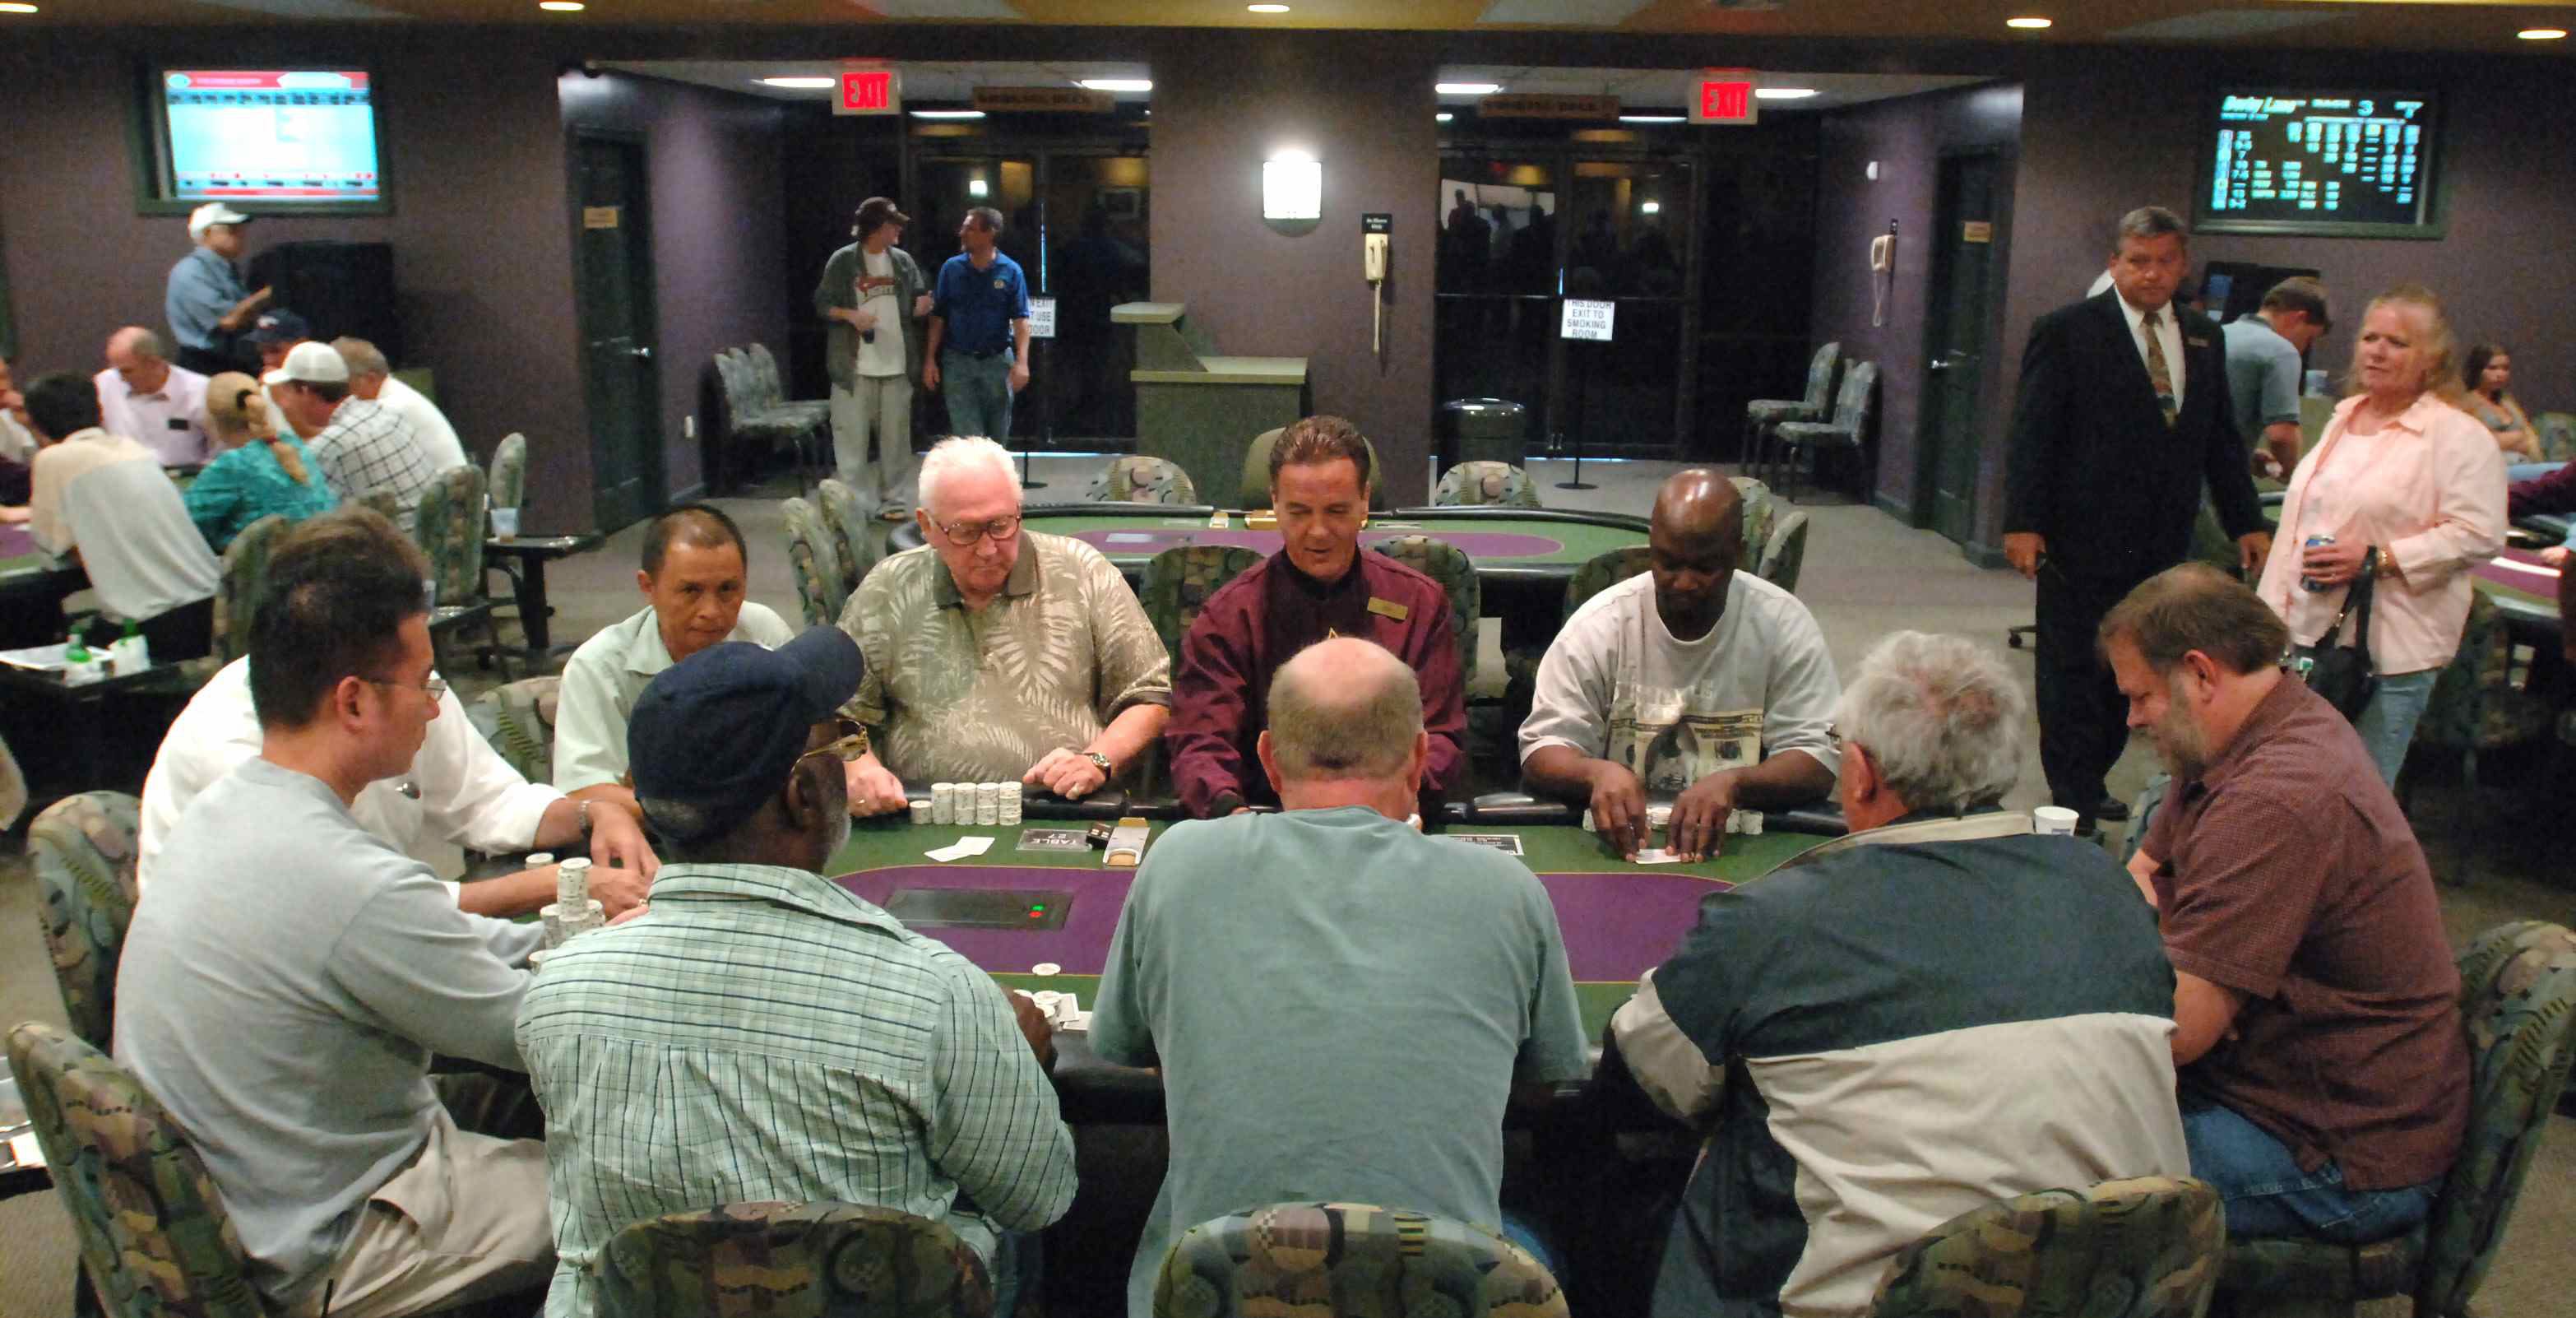 The stakes go 'No limit' poker OK'd for Jacksonville